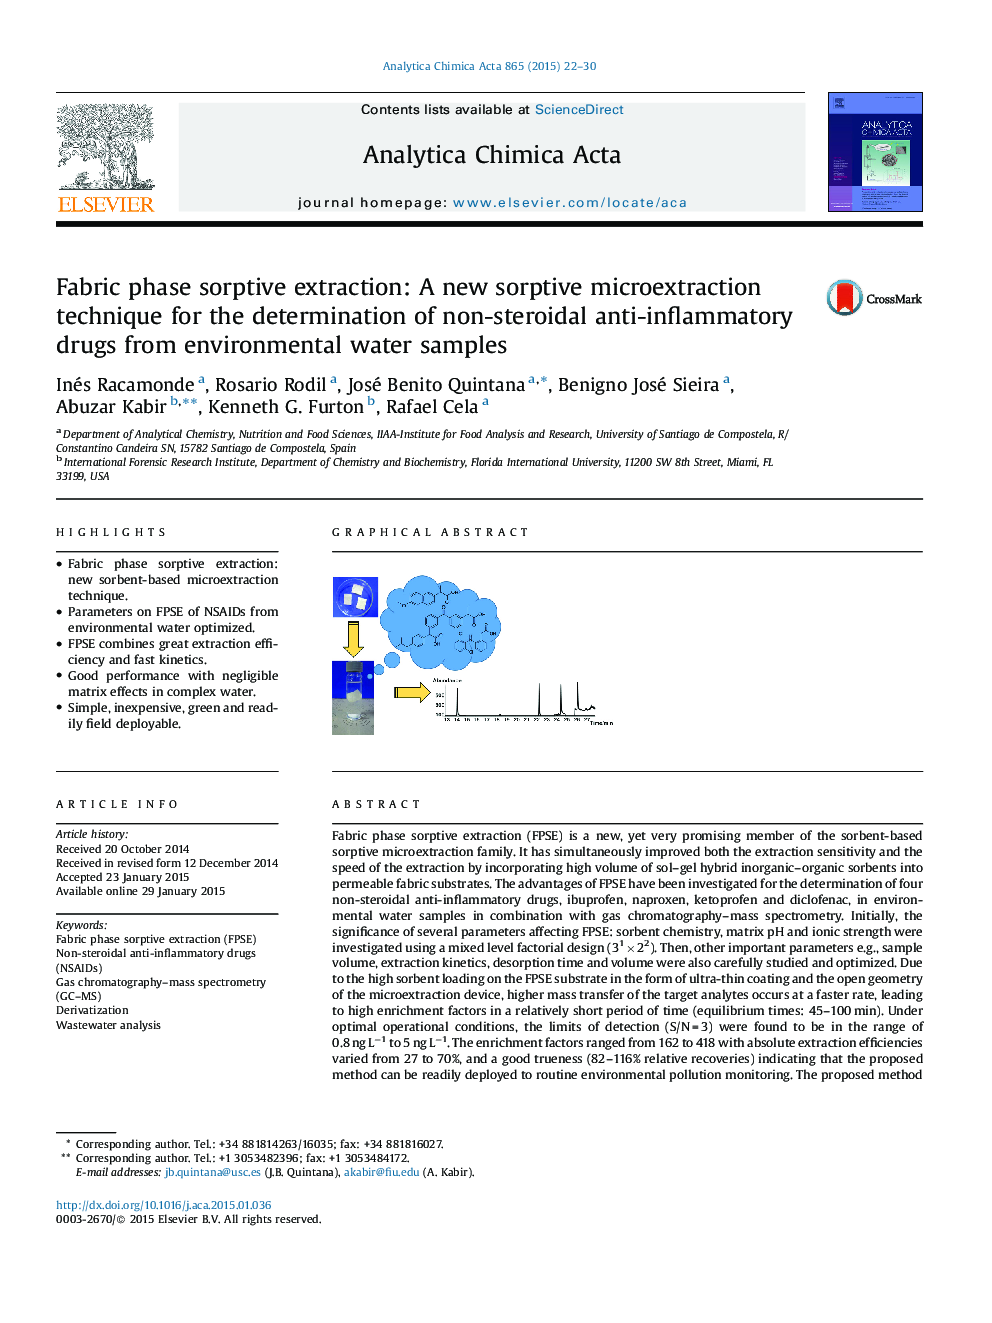 Fabric phase sorptive extraction: A new sorptive microextraction technique for the determination of non-steroidal anti-inflammatory drugs from environmental water samples